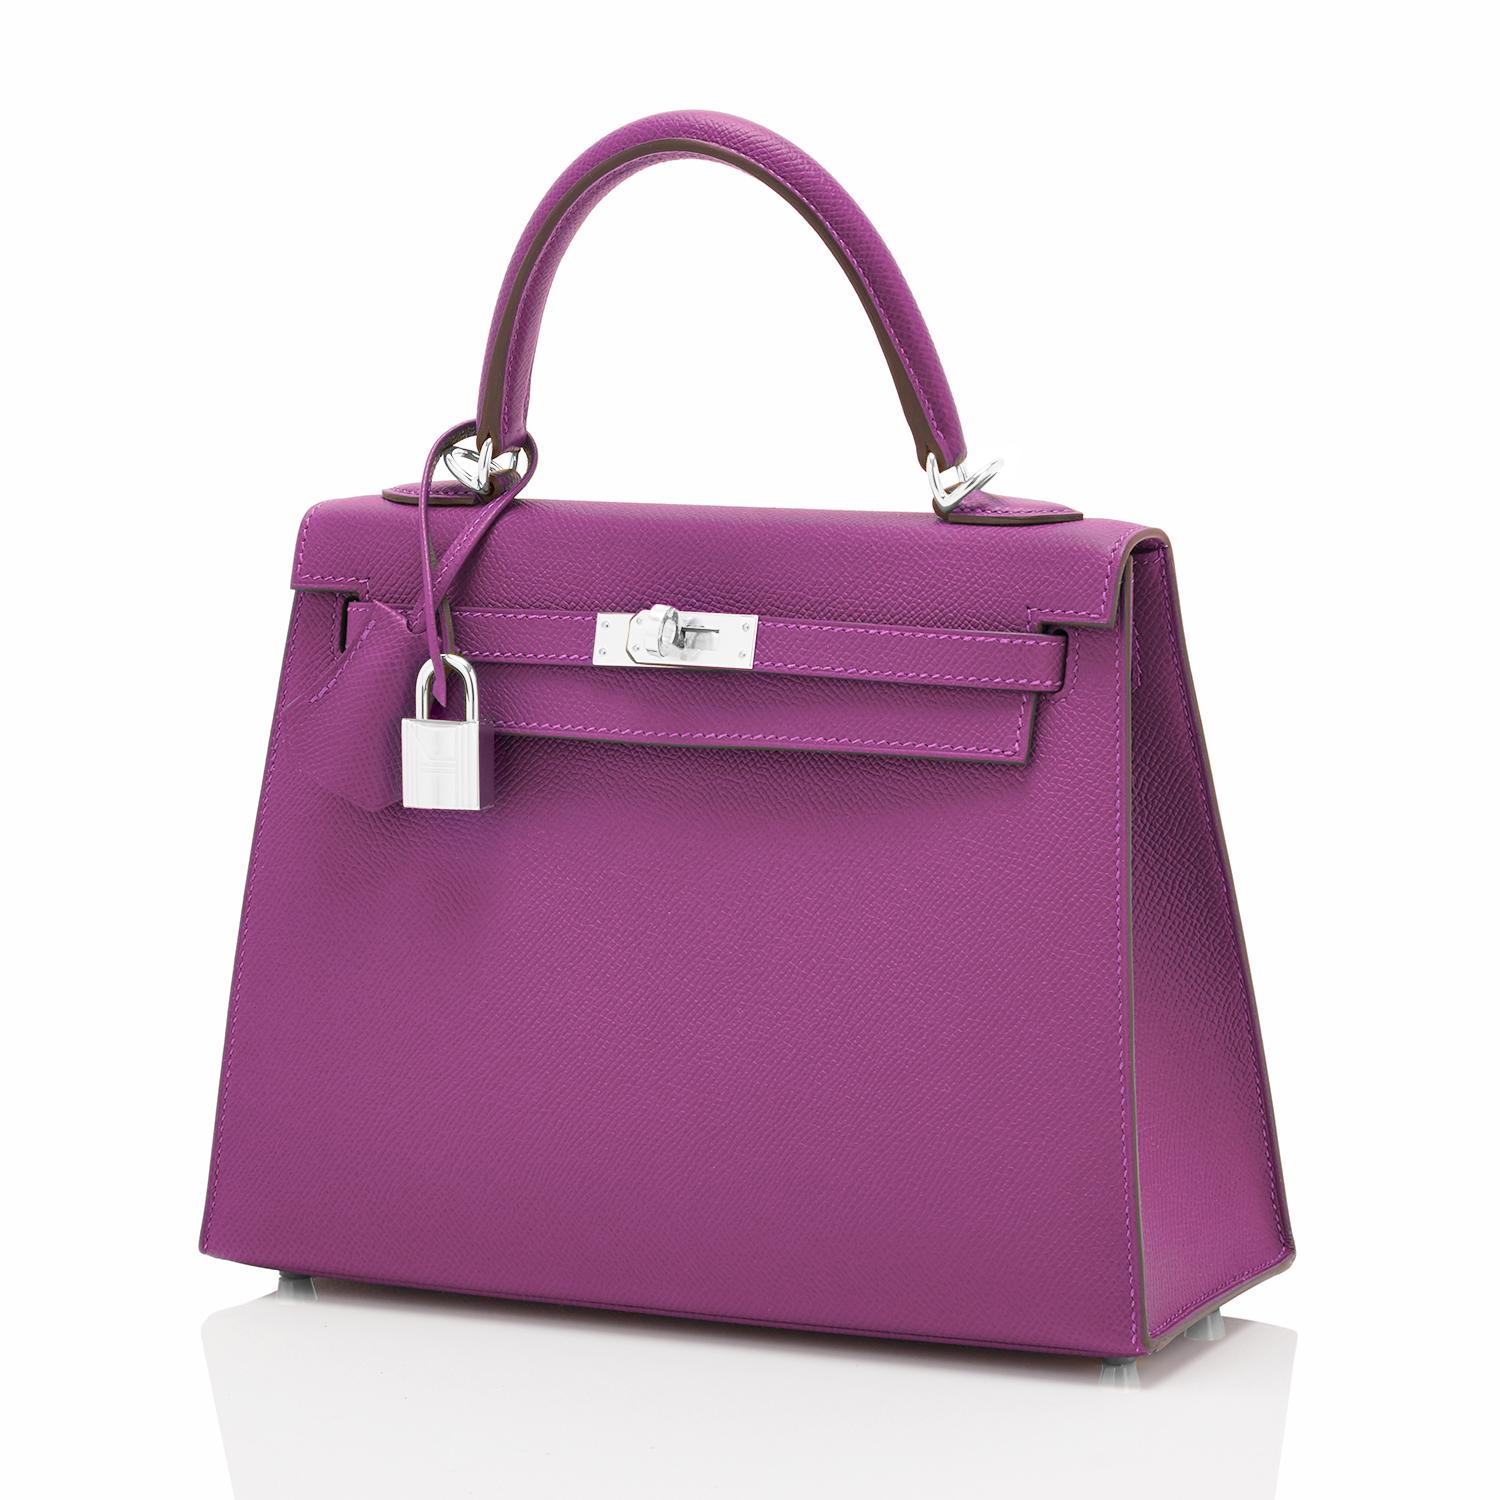 Hermes Kelly 25 Anemone Epsom Sellier Purple Shoulder Bag NEW
Devastatingly gorgeous color! Beyond darling and super chic!
New or Never Worn. Pristine Condition (with plastic on hardware).
Perfect gift! Comes full set with keys, lock, clochette,